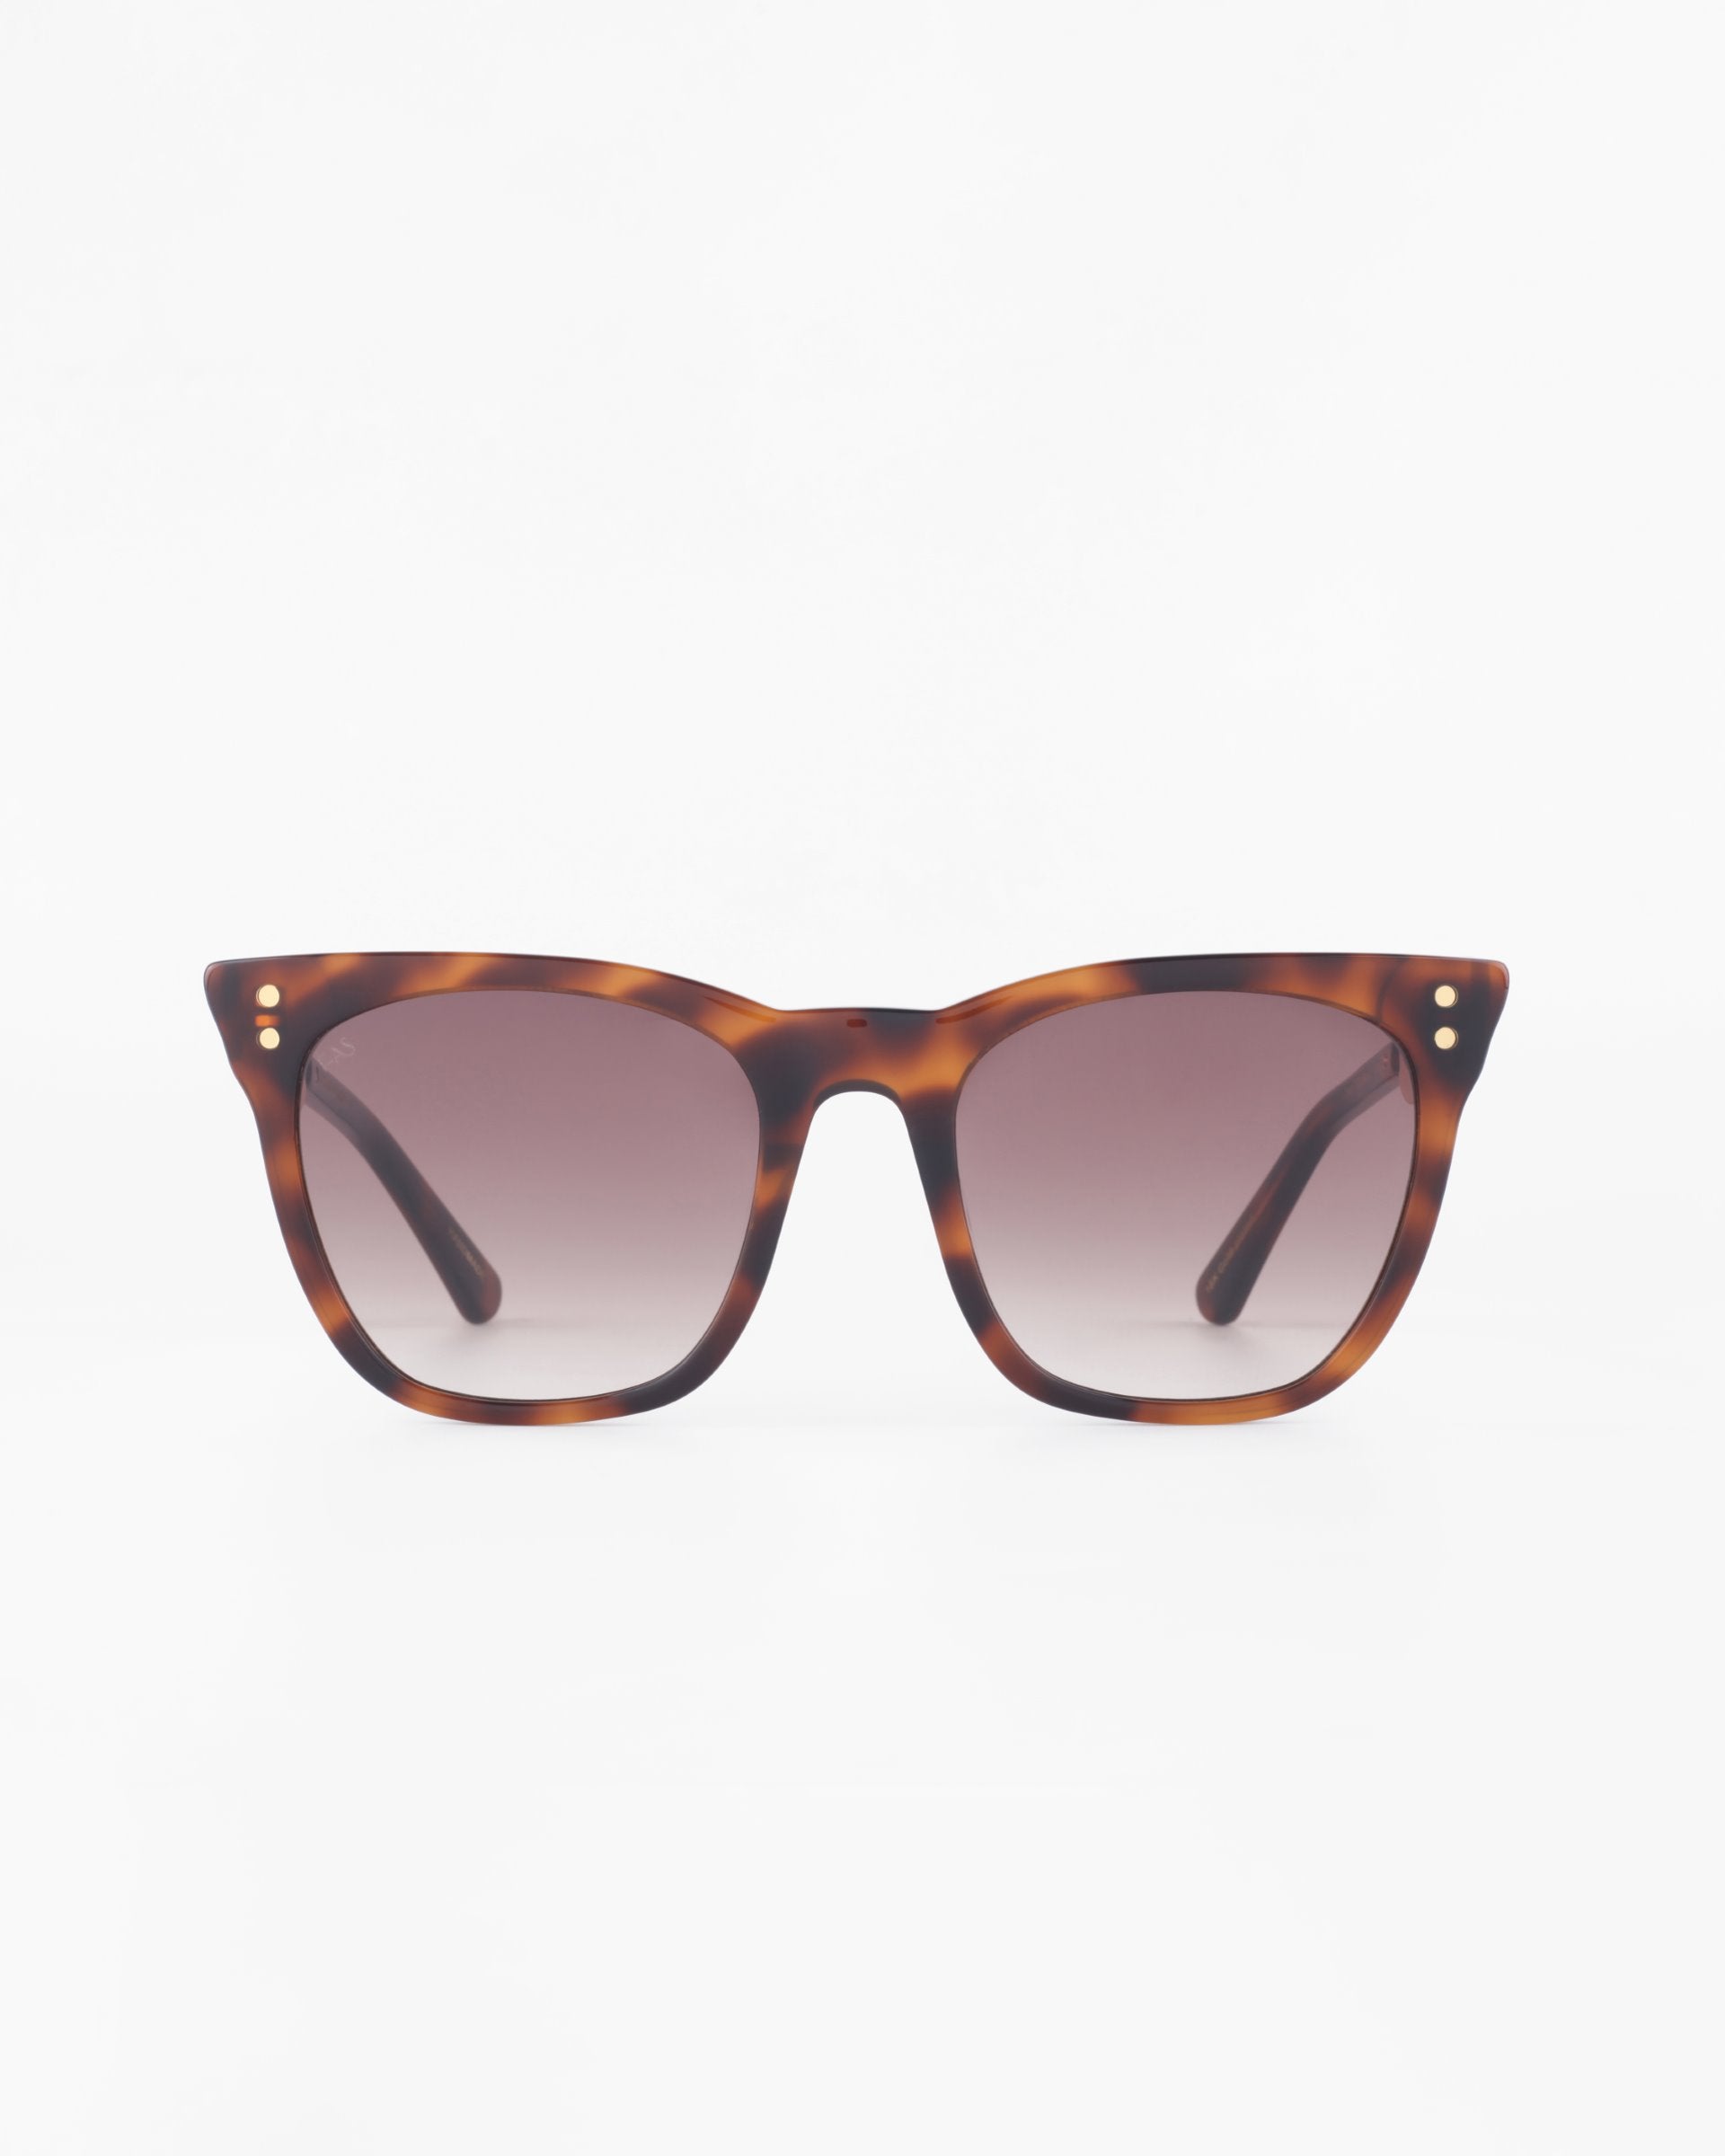 Front view of a pair of tortoiseshell Deco sunglasses by For Art's Sake® with a classic square frame design. Crafted from premium acetate, the sunglasses feature gradient lenses and small metallic dots near the hinges on both sides of the frame. The background is plain white.